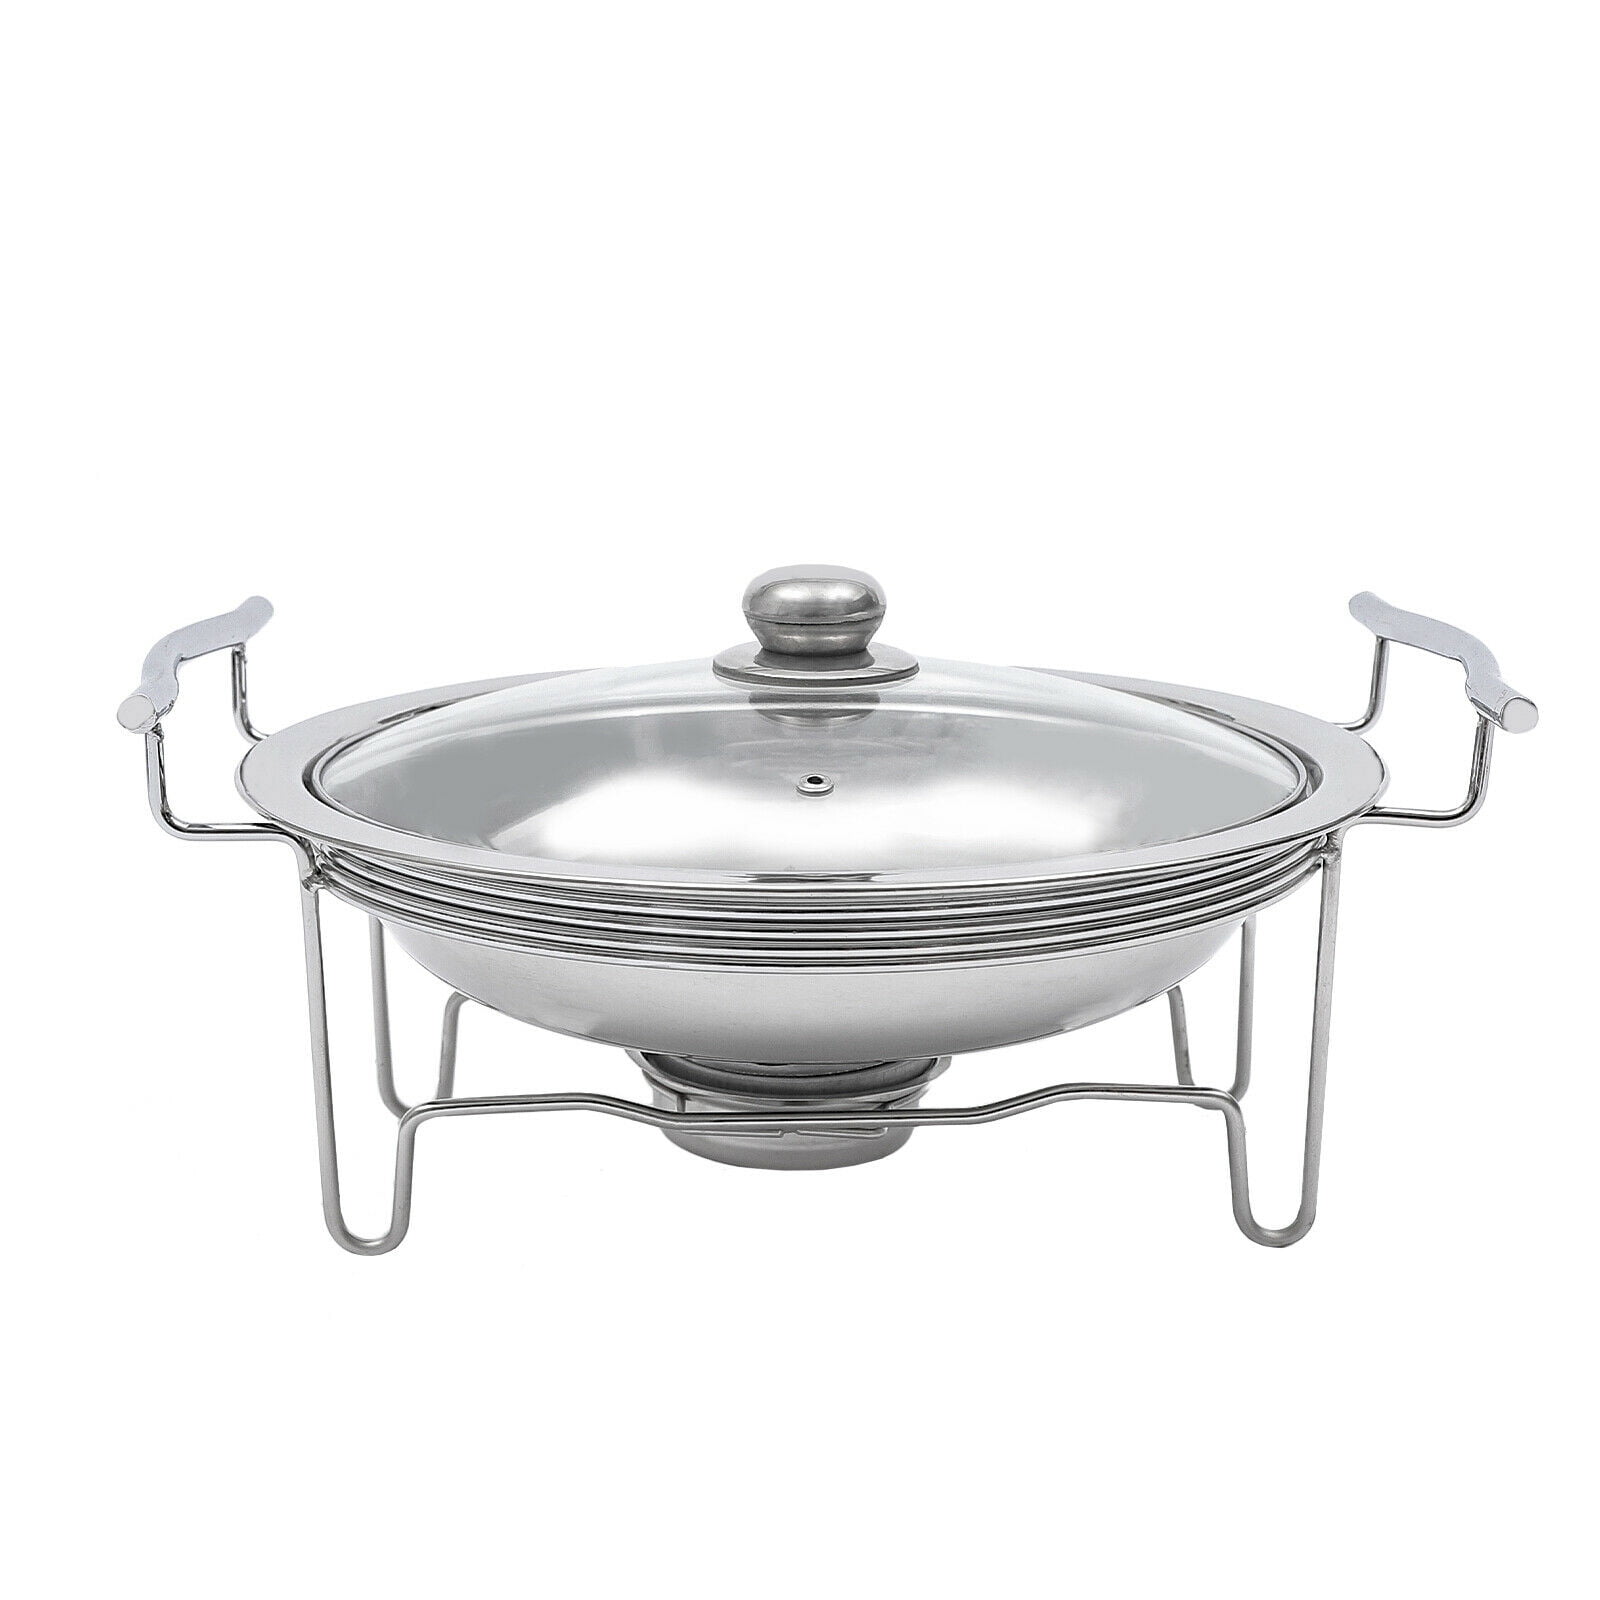 Oukaning 11 inch Round Chafing Dish Stainless Steel Buffet Catering Food Warmers with Glass Lid Multi-Purpose, Size: 14.9*14.9*7.5Inch, Silver